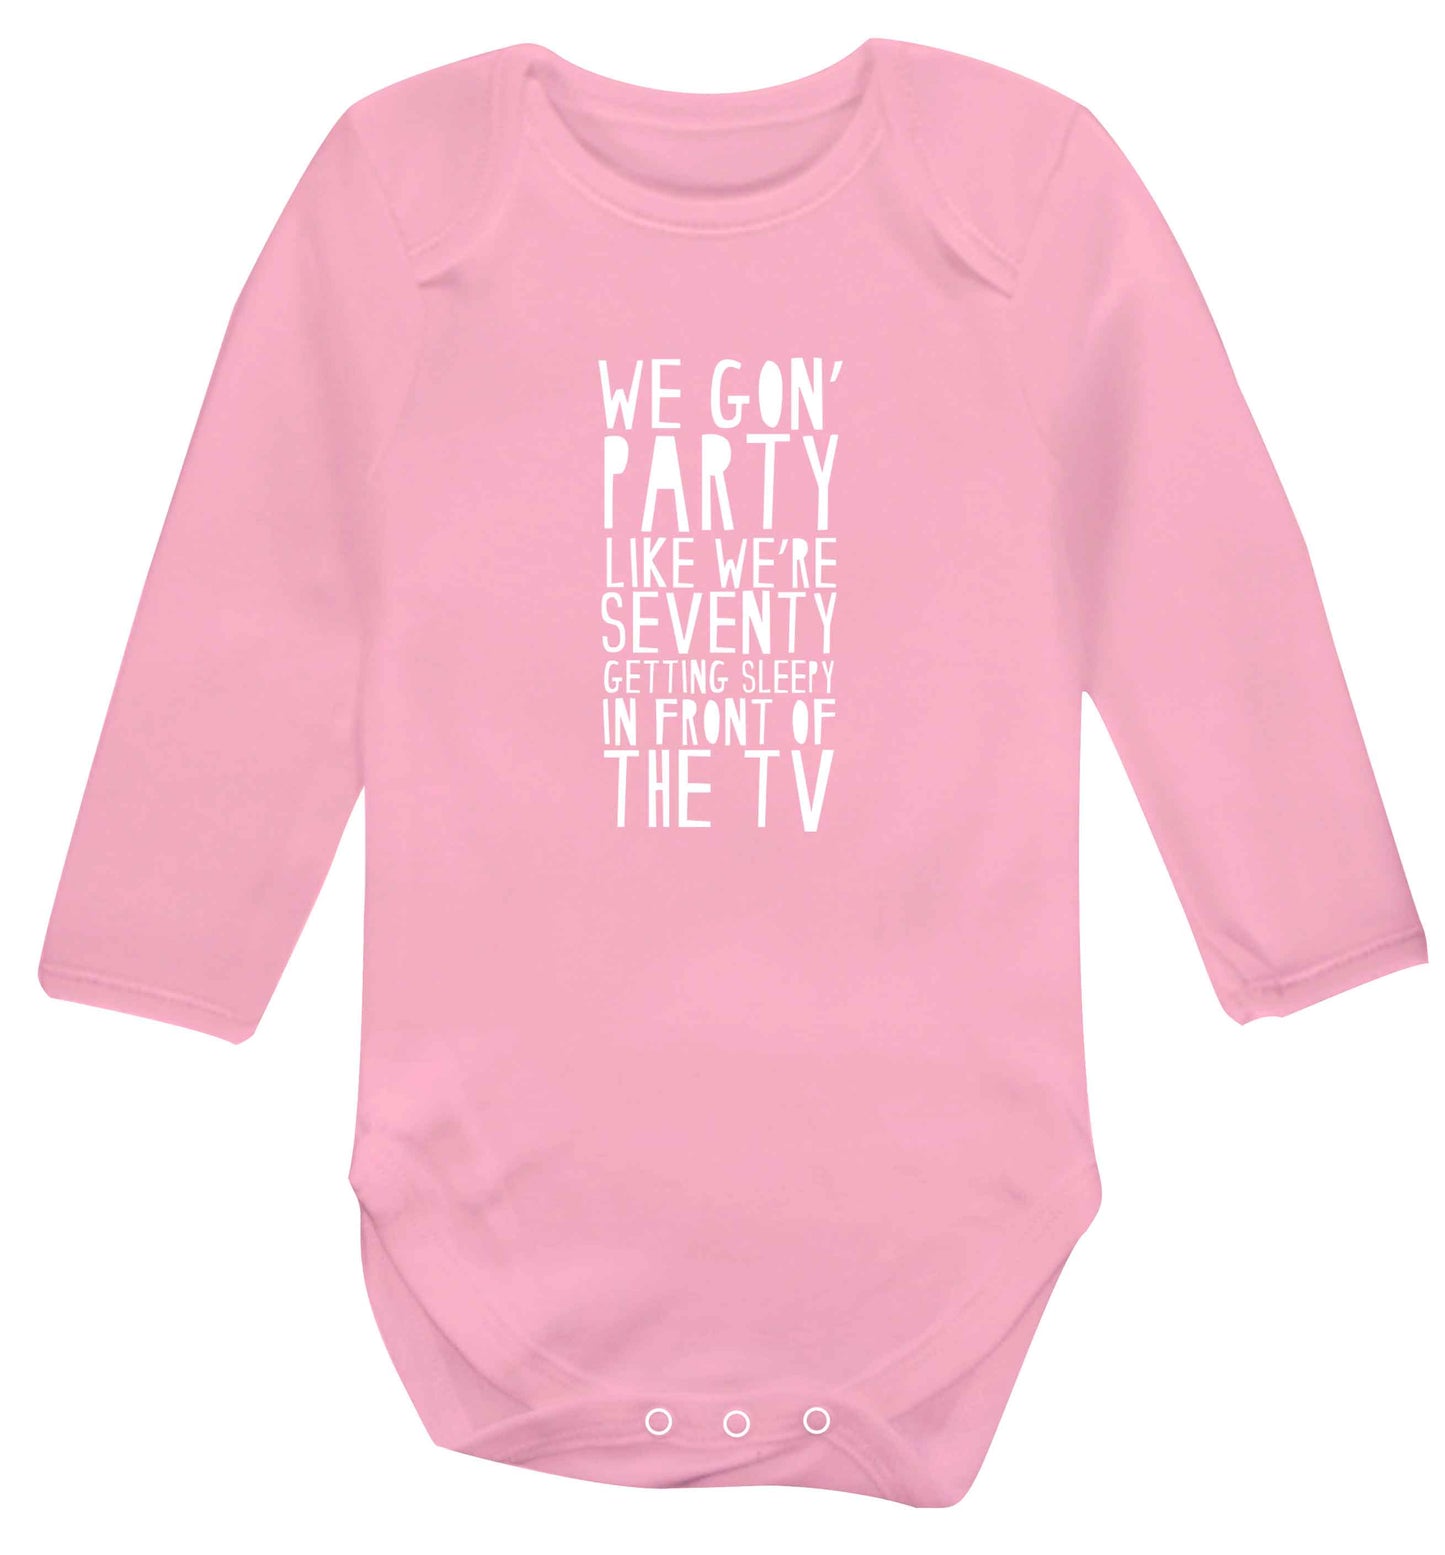 We gon' party like we're seventy getting sleepy in front of the TV baby vest long sleeved pale pink 6-12 months